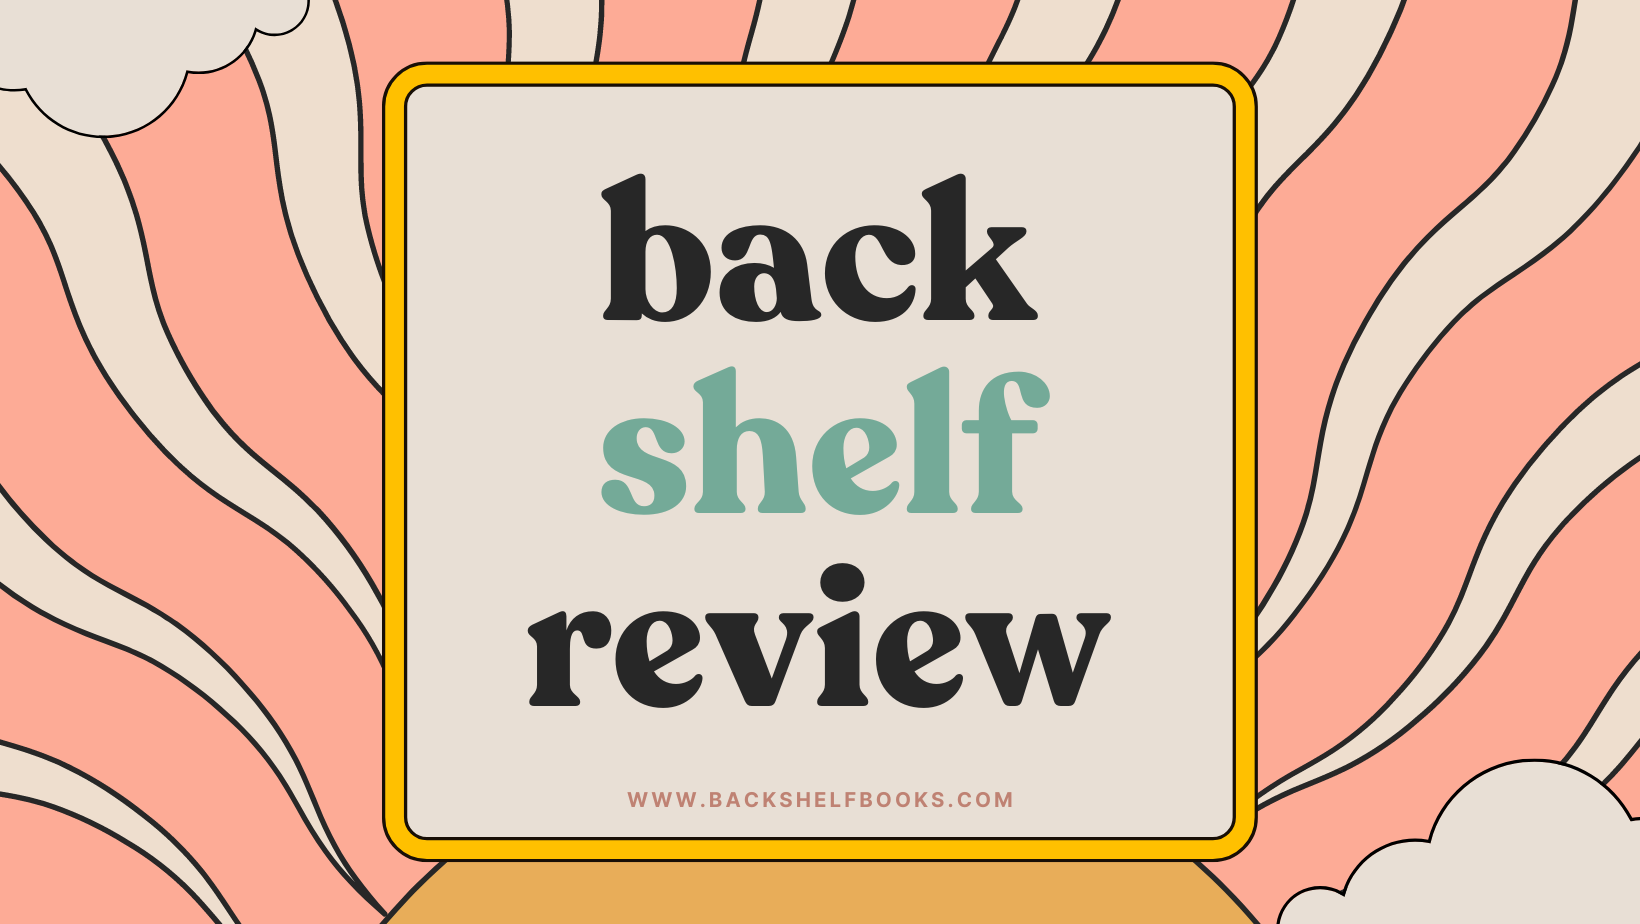 Back Shelf Review: Sea of Tranquility by Emily St. John Mandel